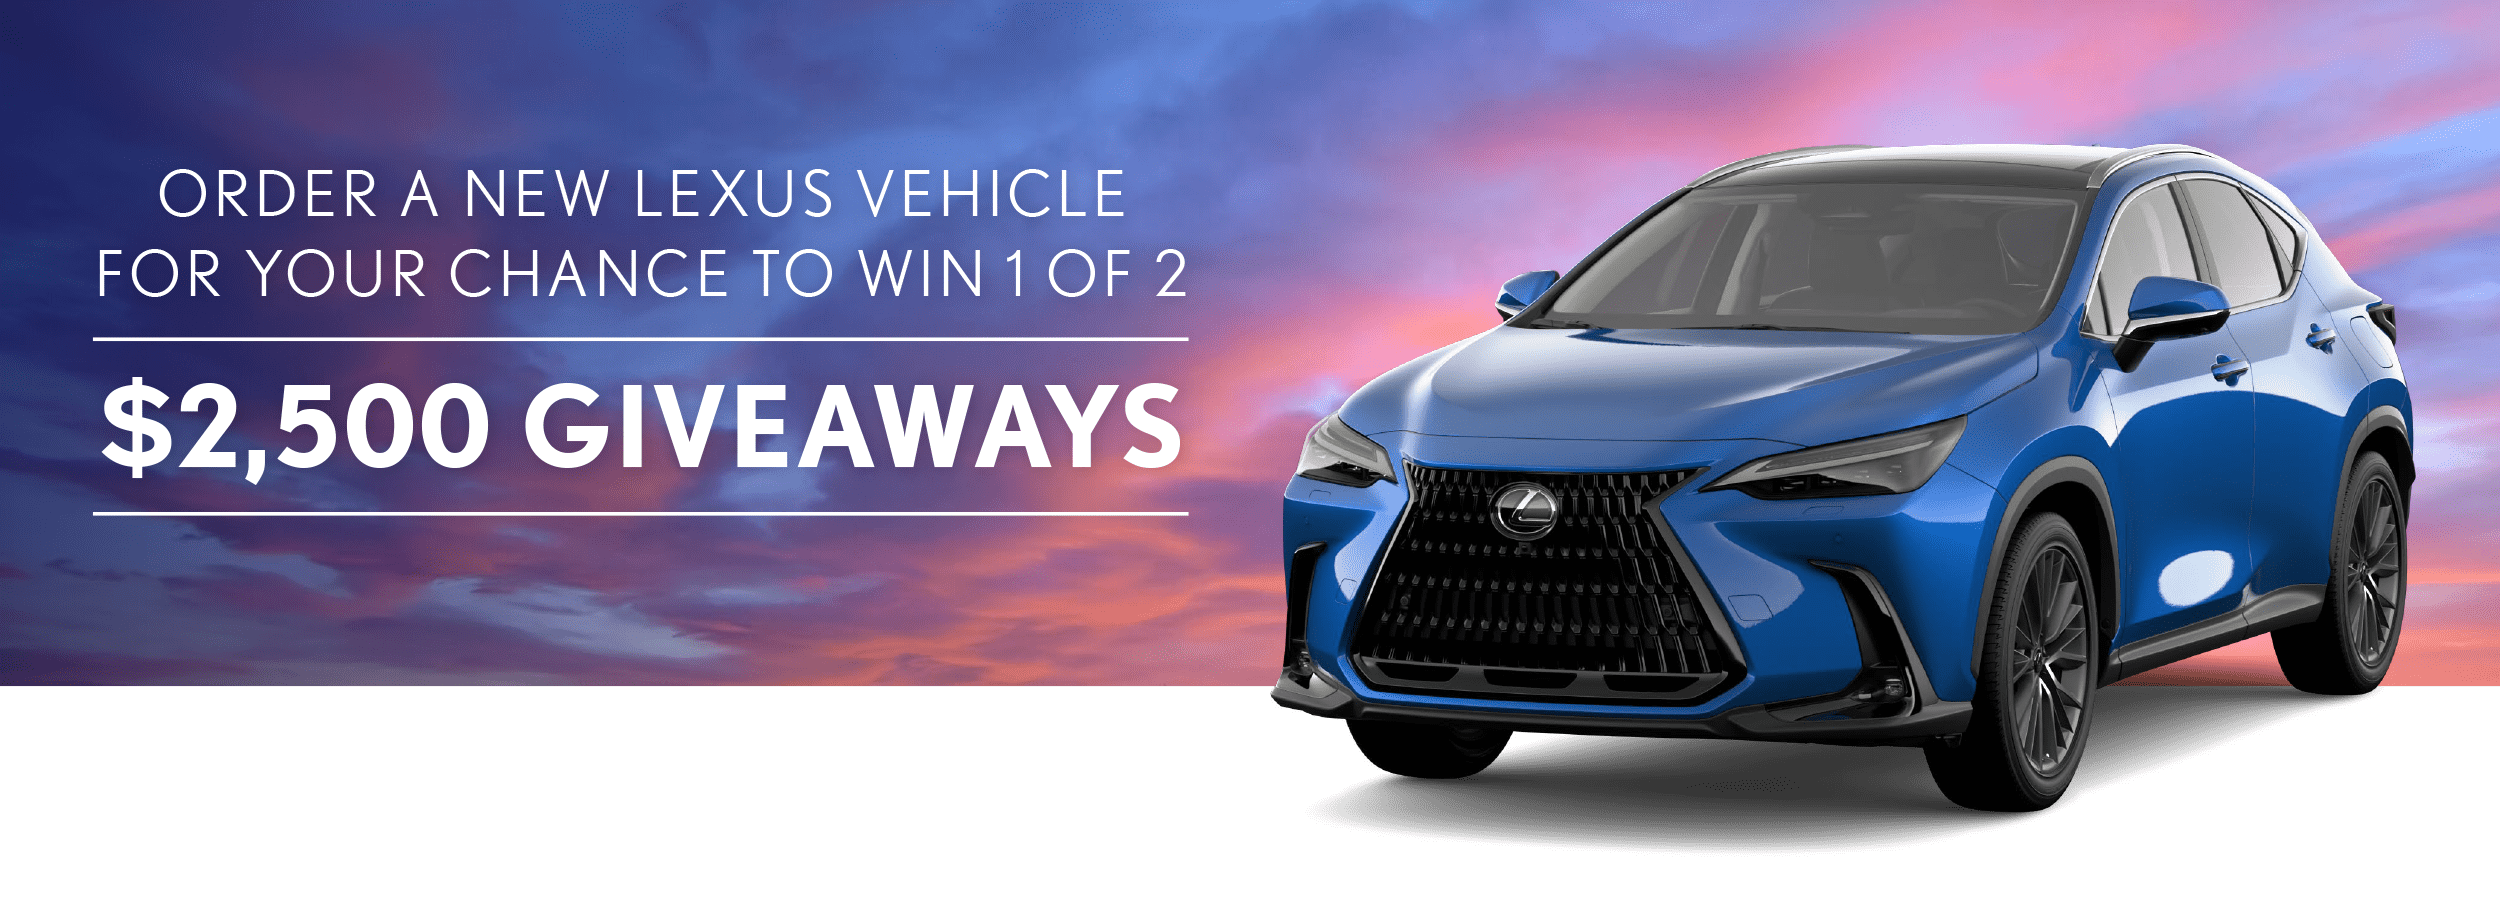 Birchwood Lexus $2500 Giveaway With the Purchase of a New Vehicle